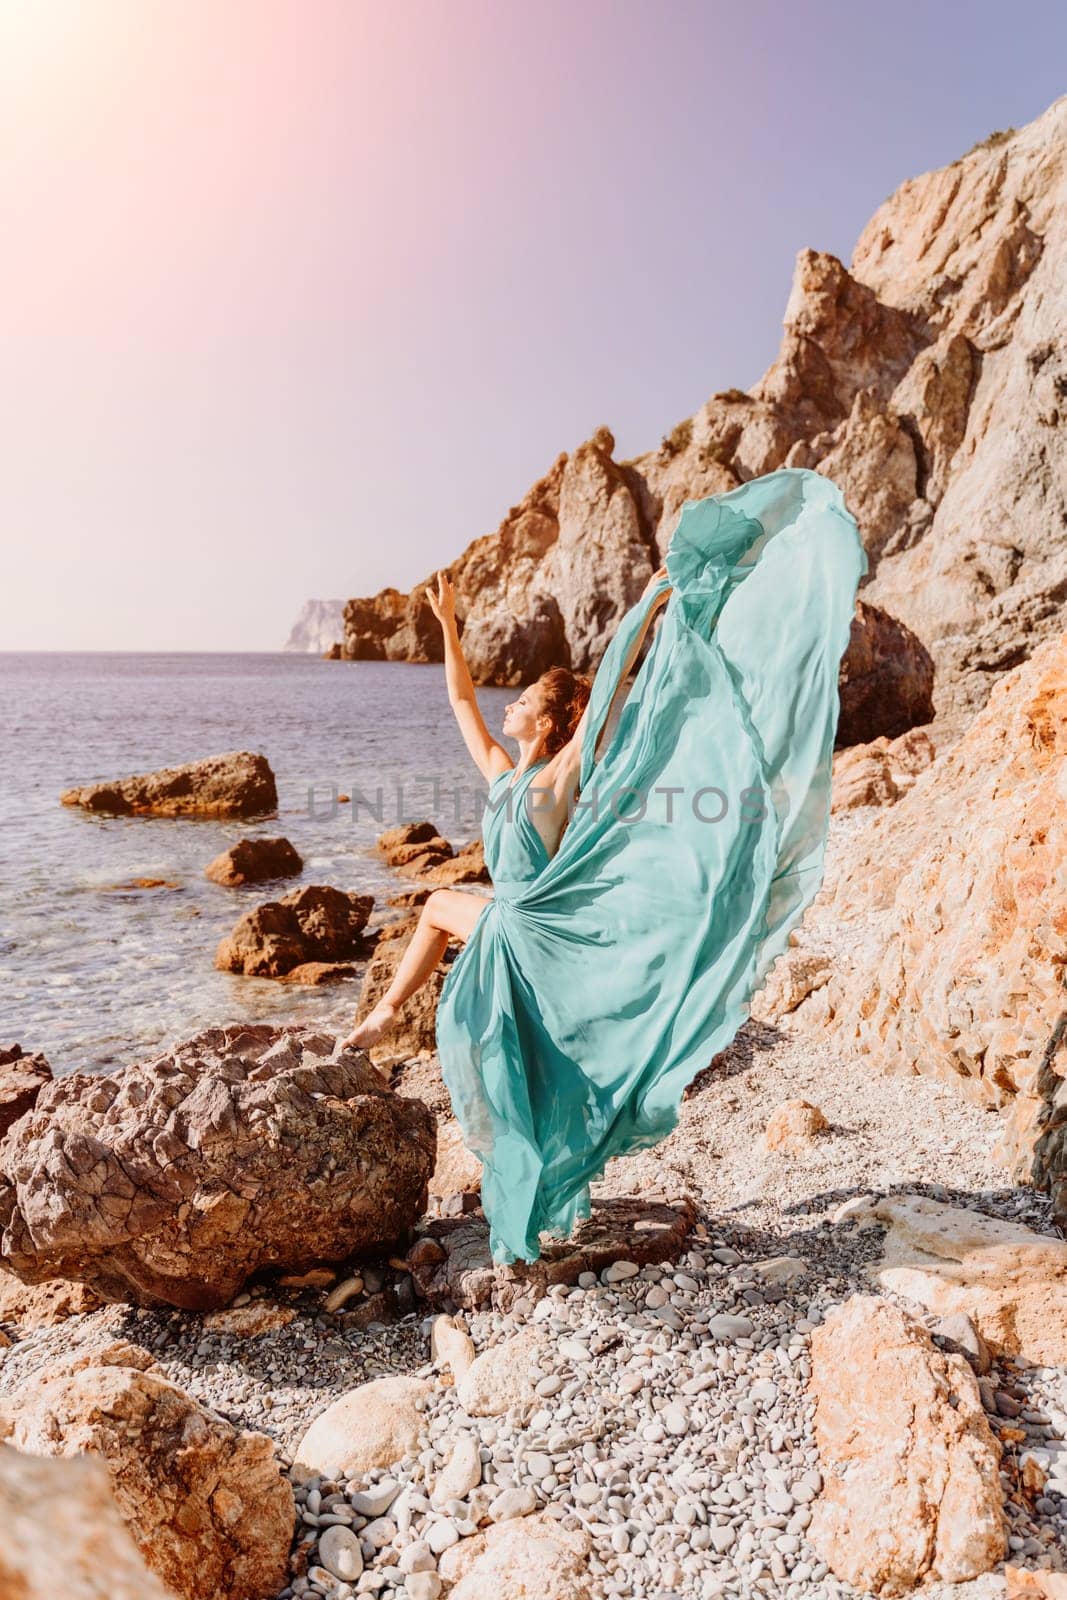 Woman green dress sea. Woman in a long mint dress posing on a beach with rocks on sunny day. Girl on the nature on blue sky background